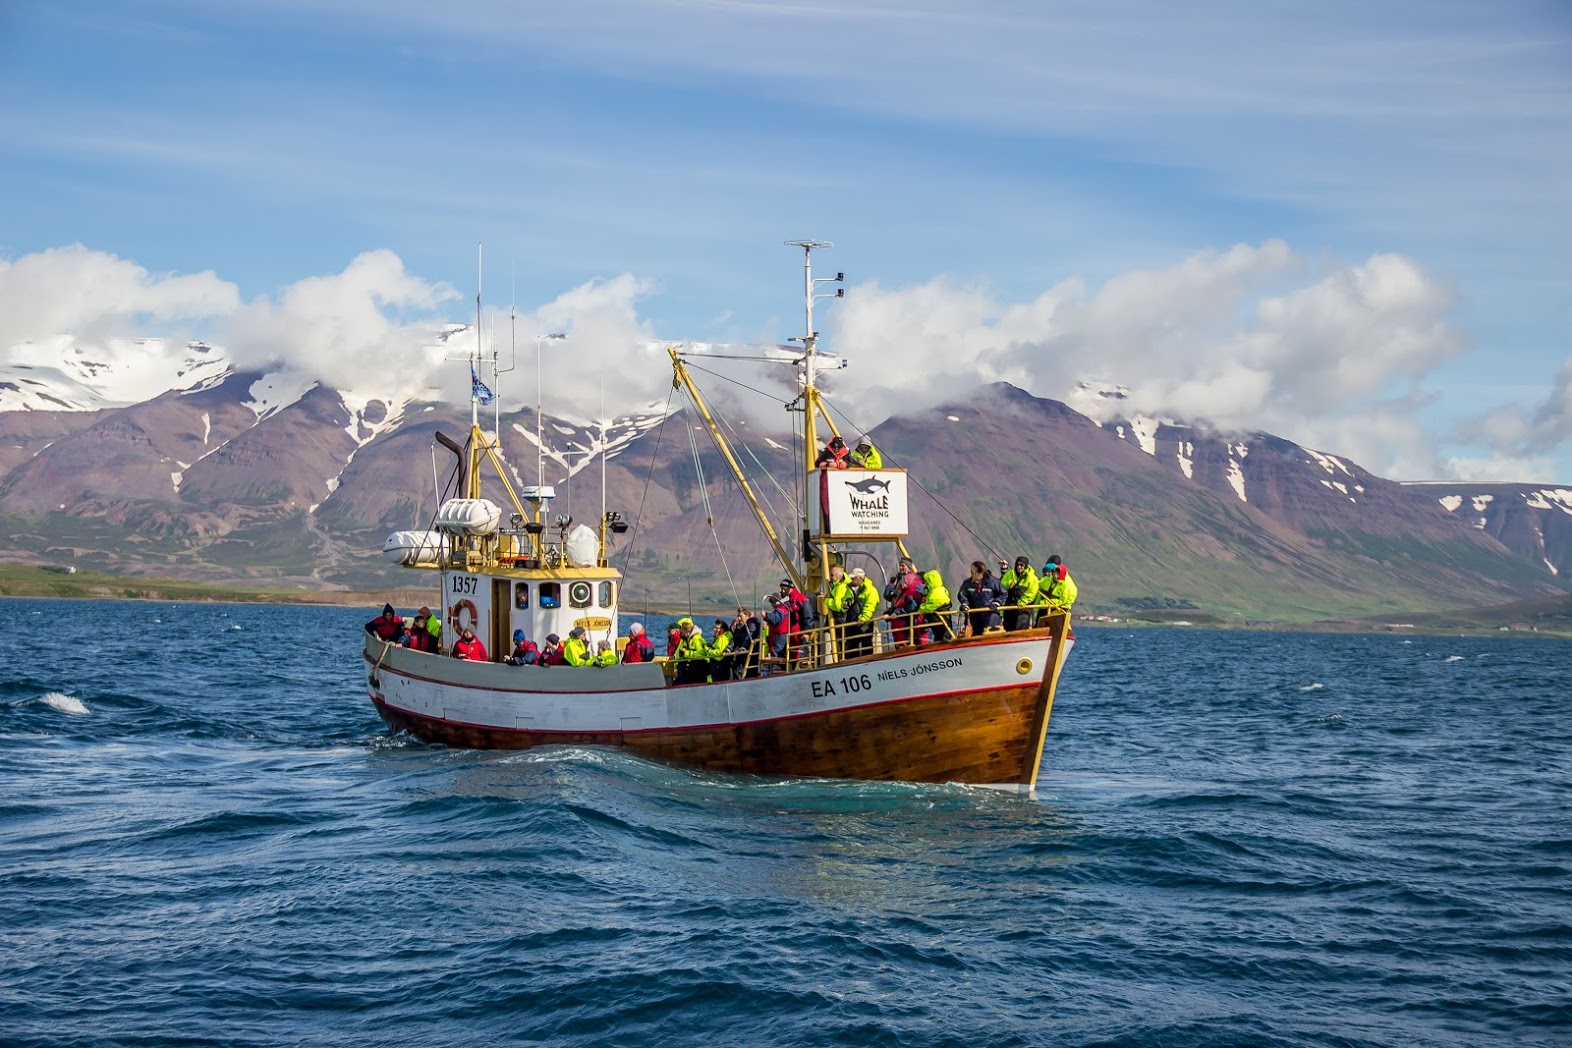 North Iceland is a great location for whale watching and has one of the highest success rates.